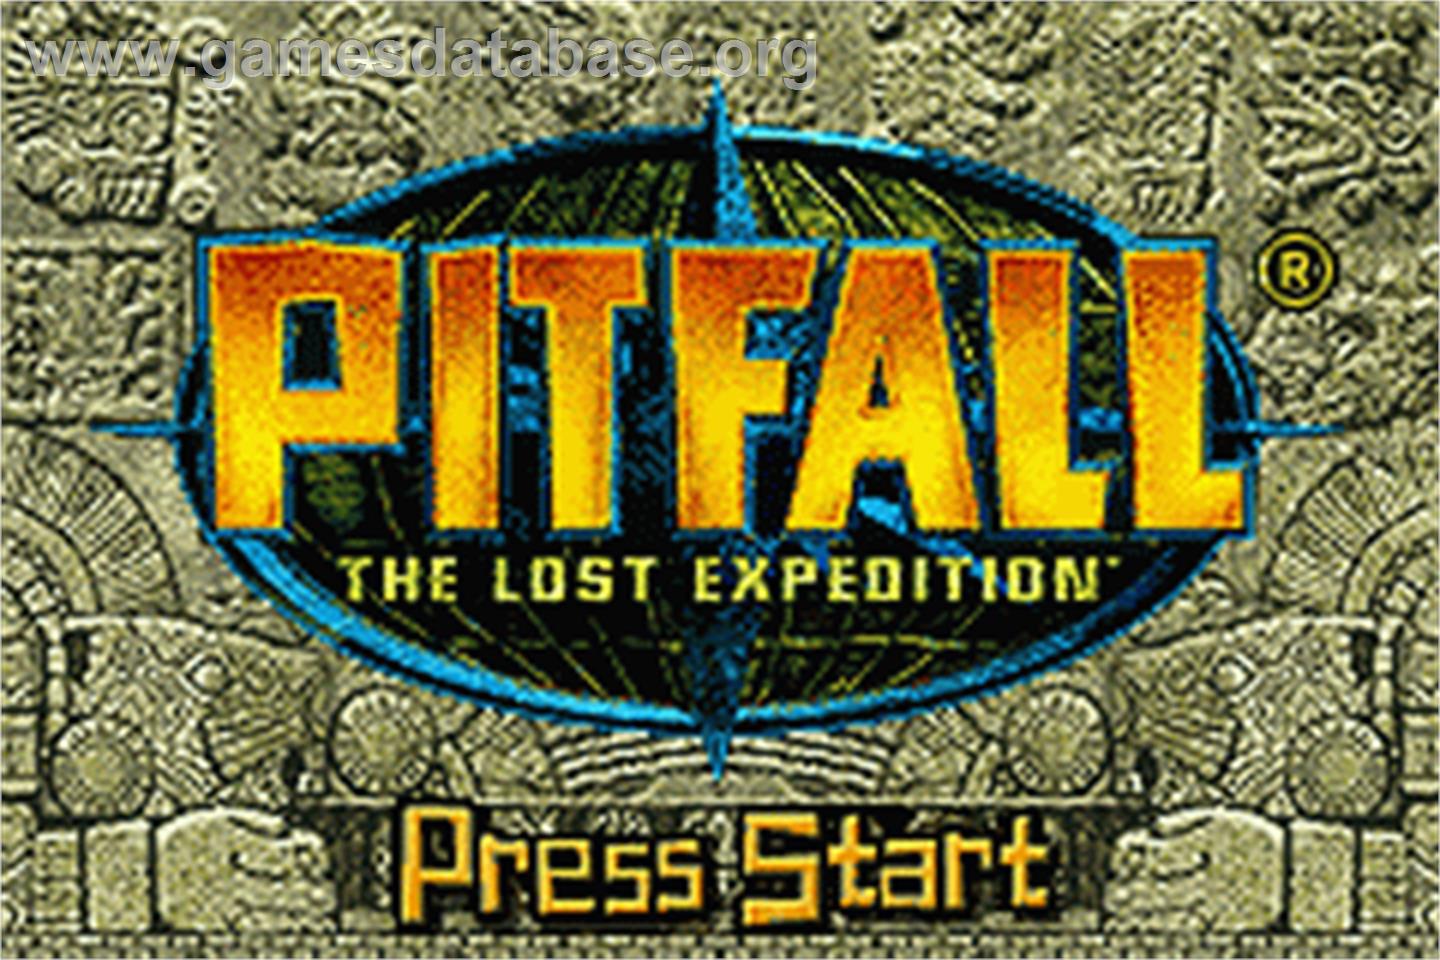 Pitfall: The Lost Expedition - Nintendo Game Boy Advance - Artwork - Title Screen